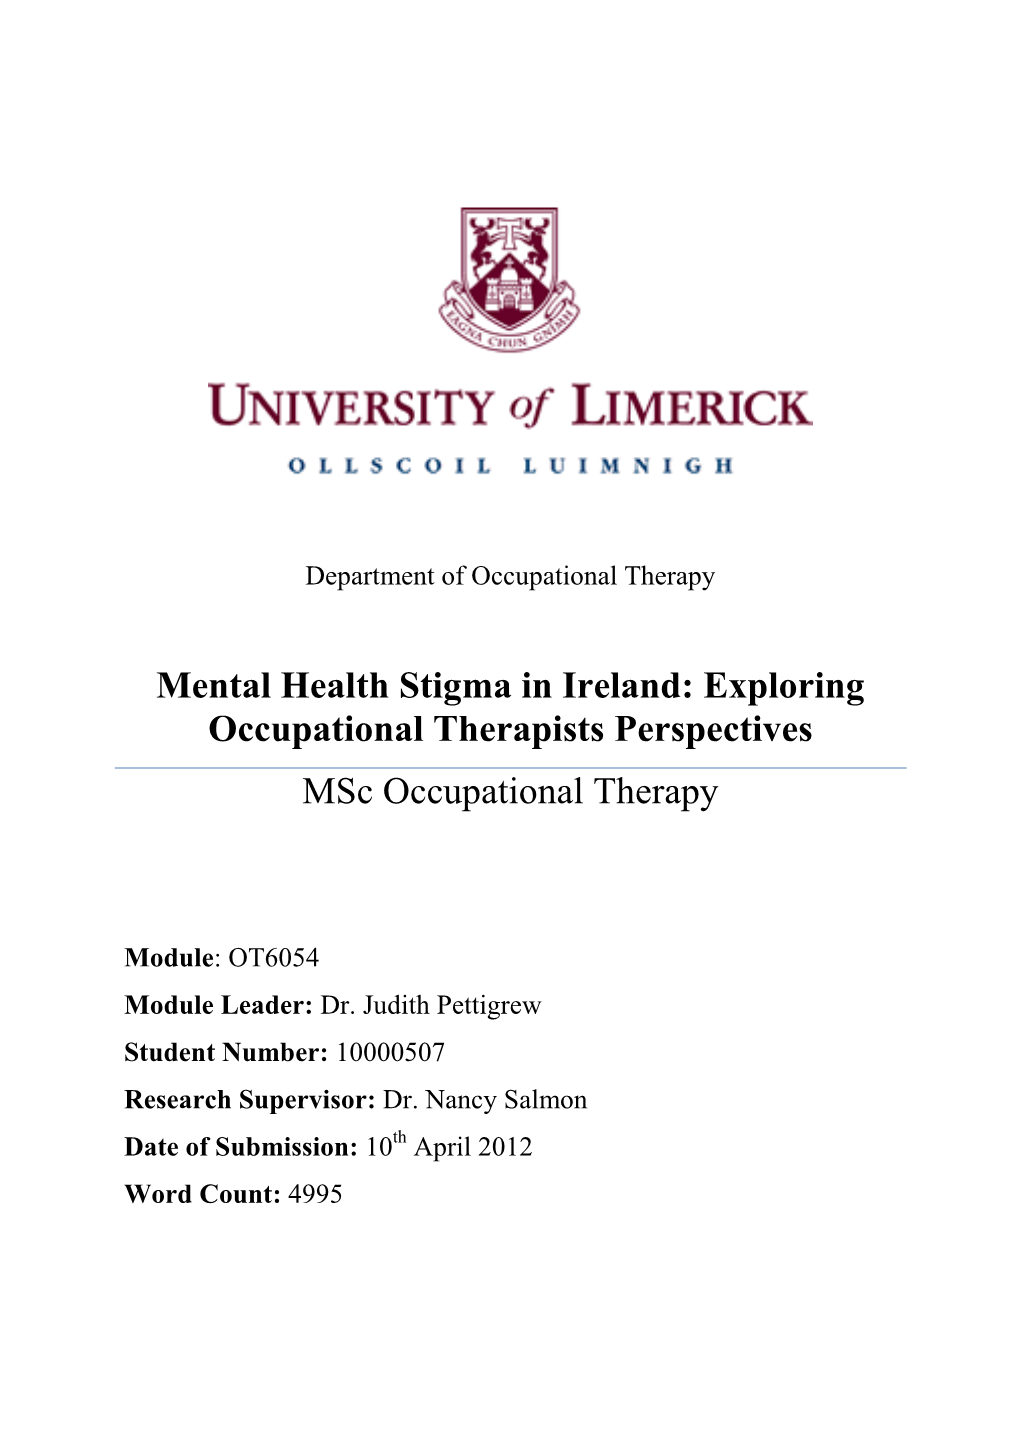 Mental Health Stigma in Ireland: Exploring Occupational Therapists Perspectives Msc Occupational Therapy